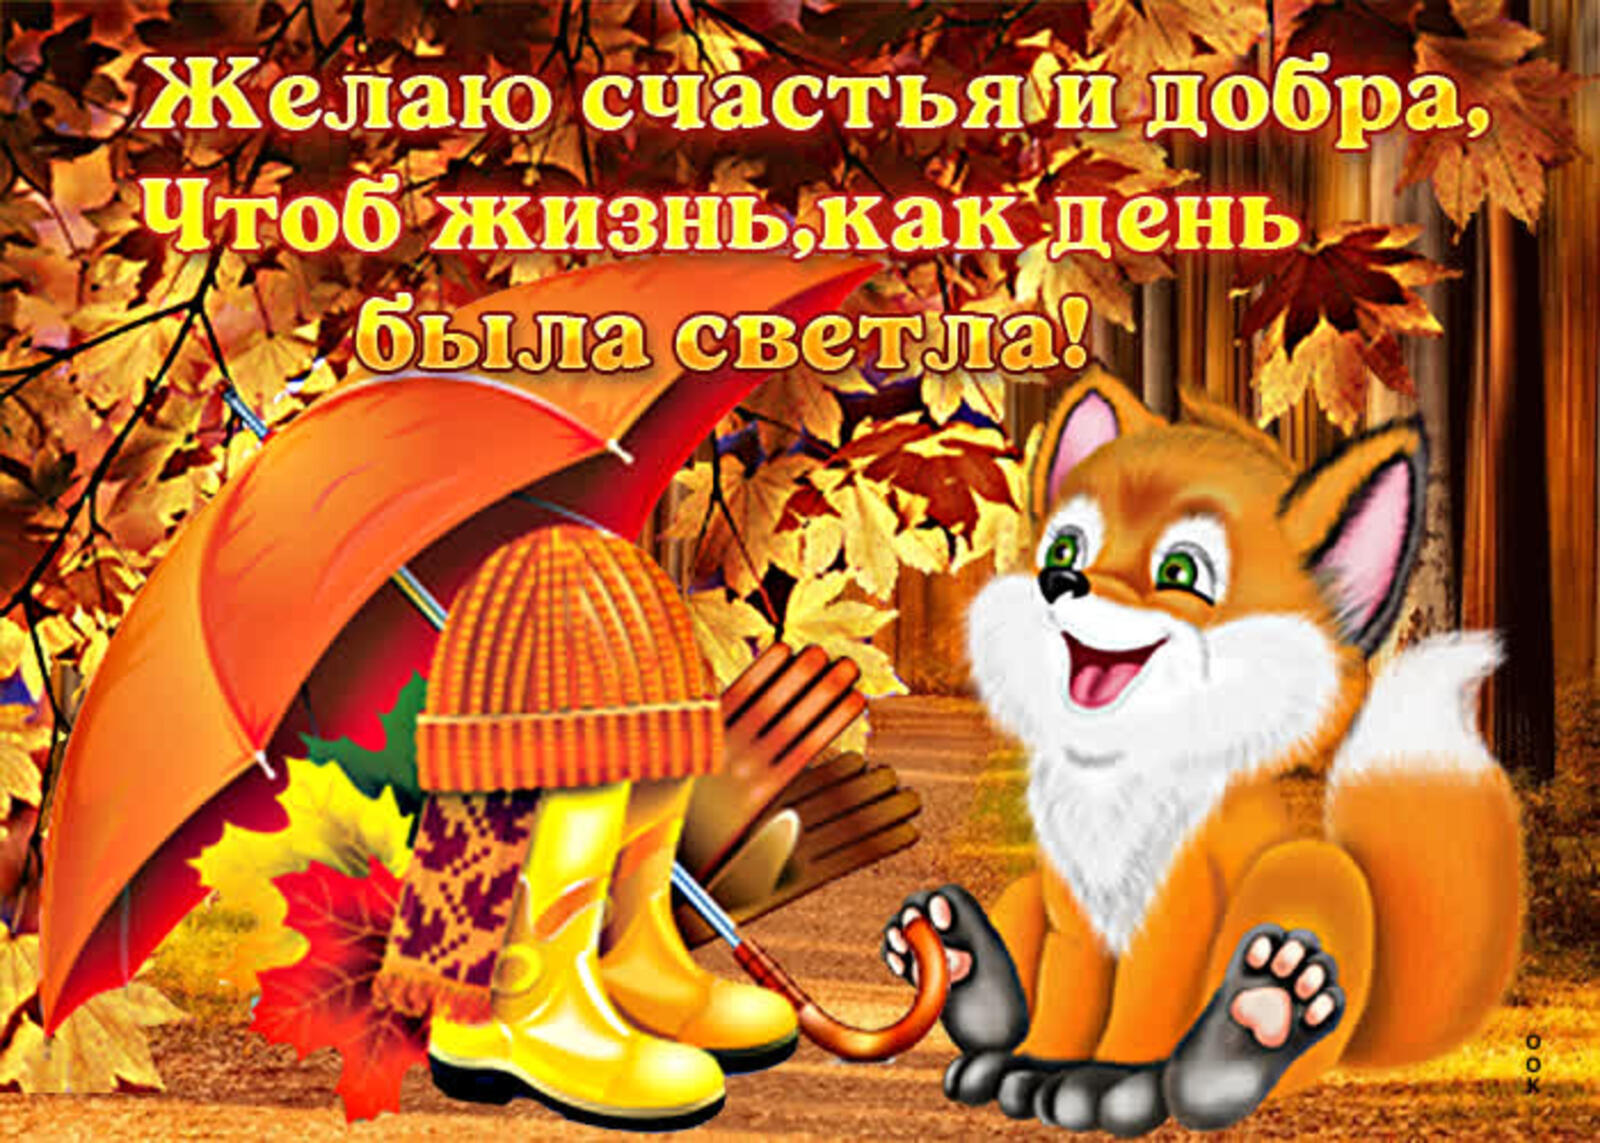 i wish you happiness and kindness fox request